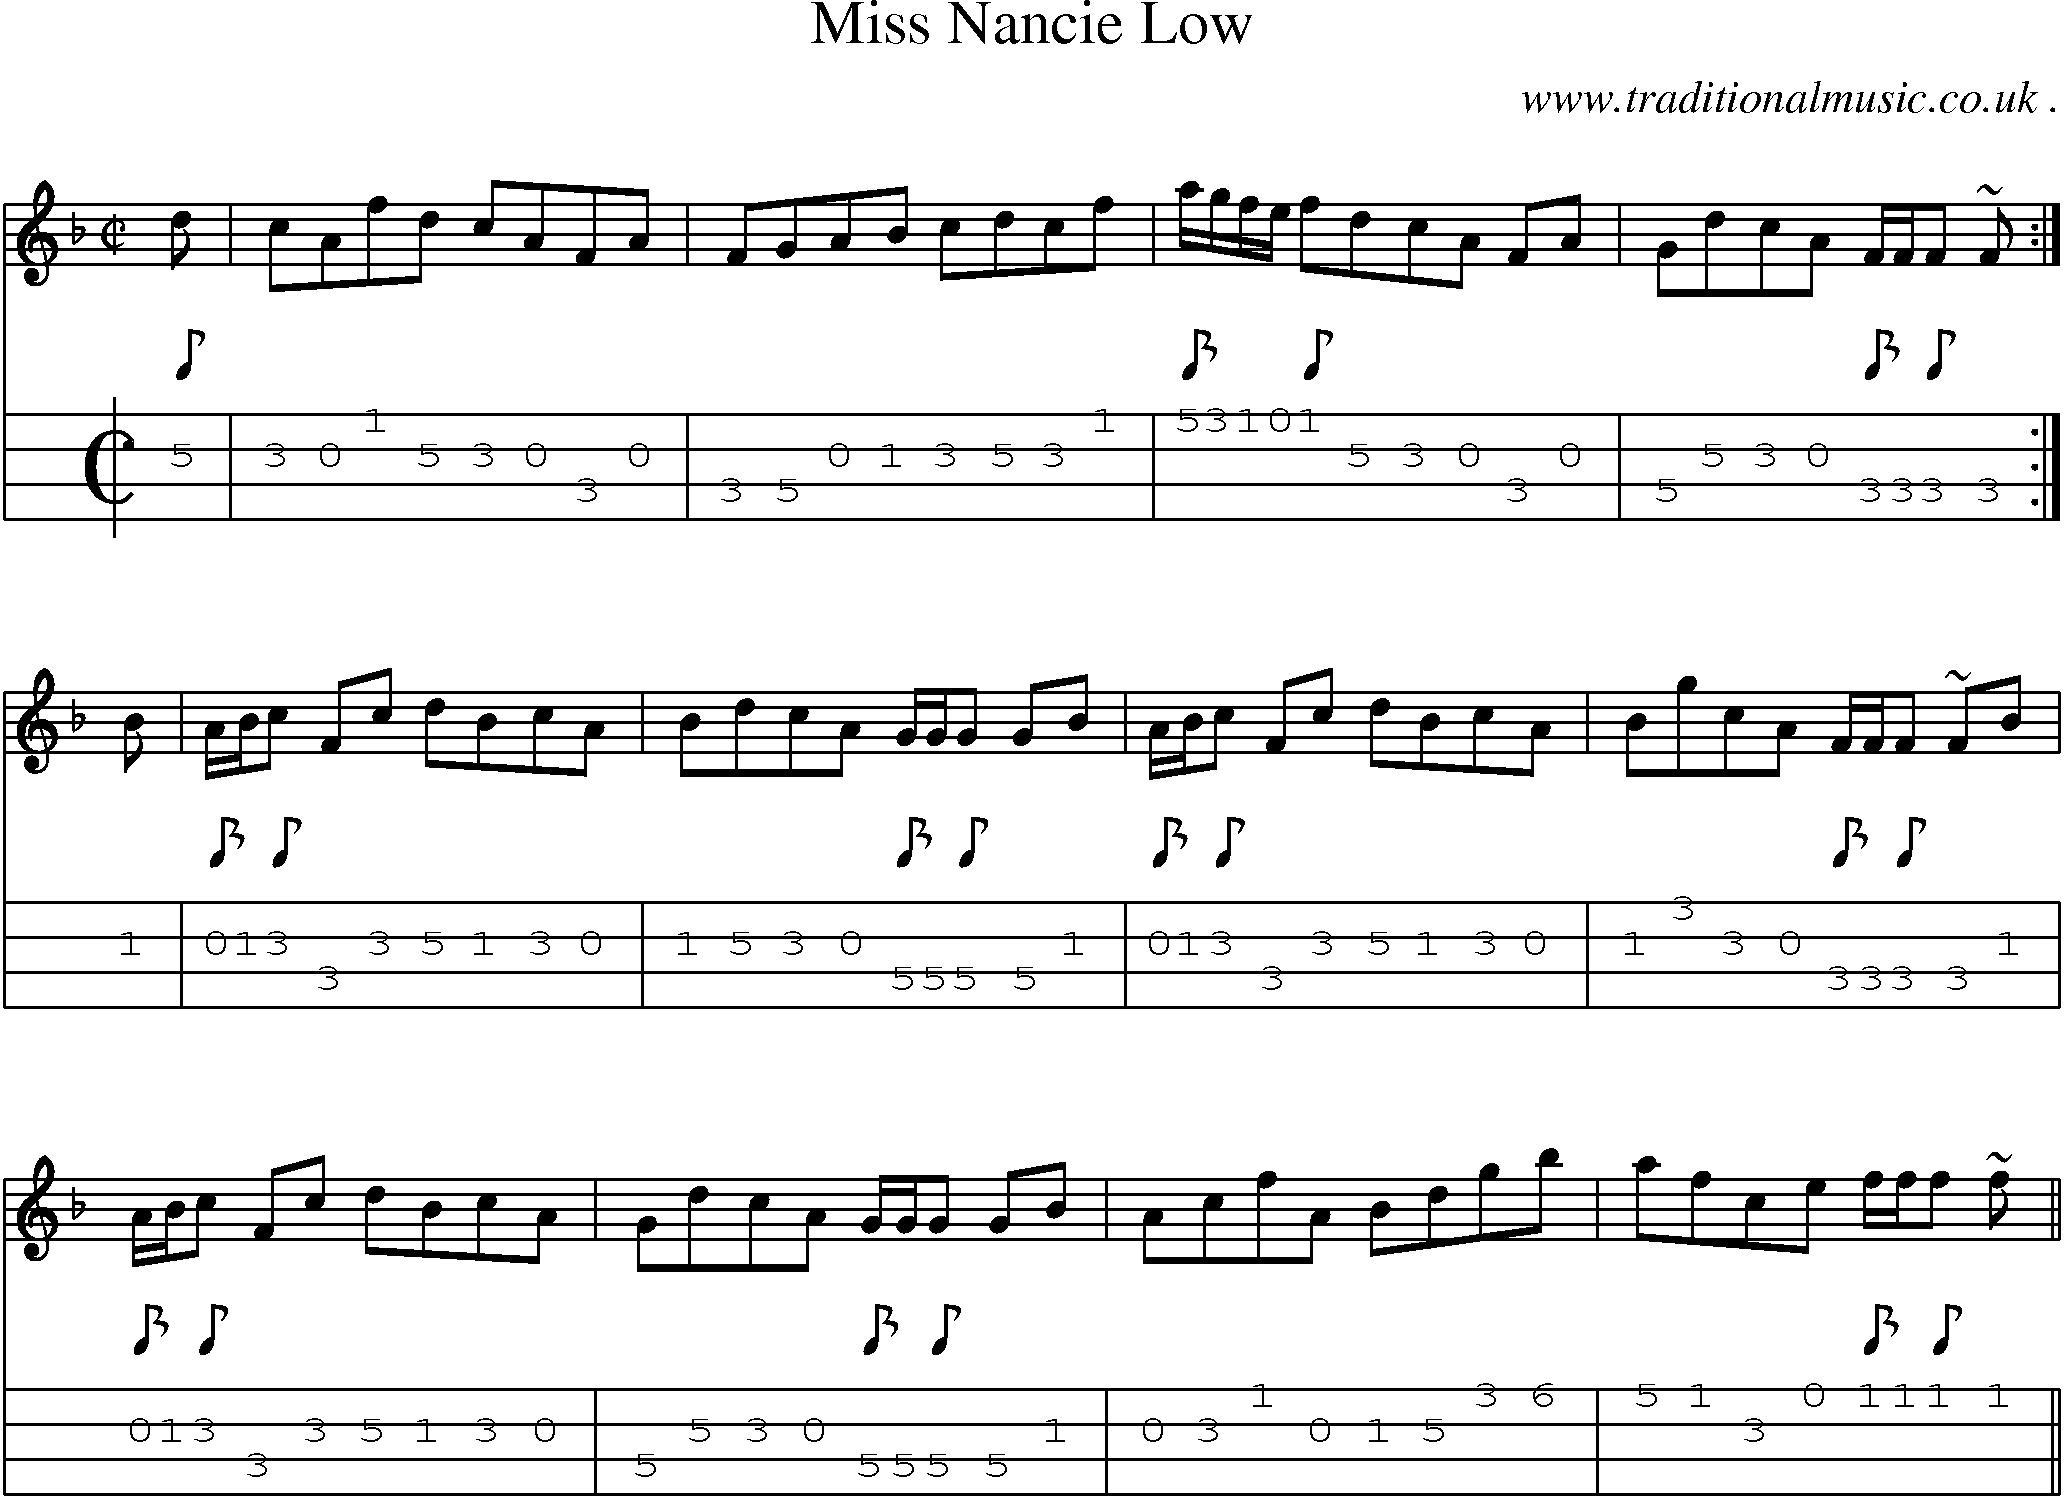 Sheet-music  score, Chords and Mandolin Tabs for Miss Nancie Low